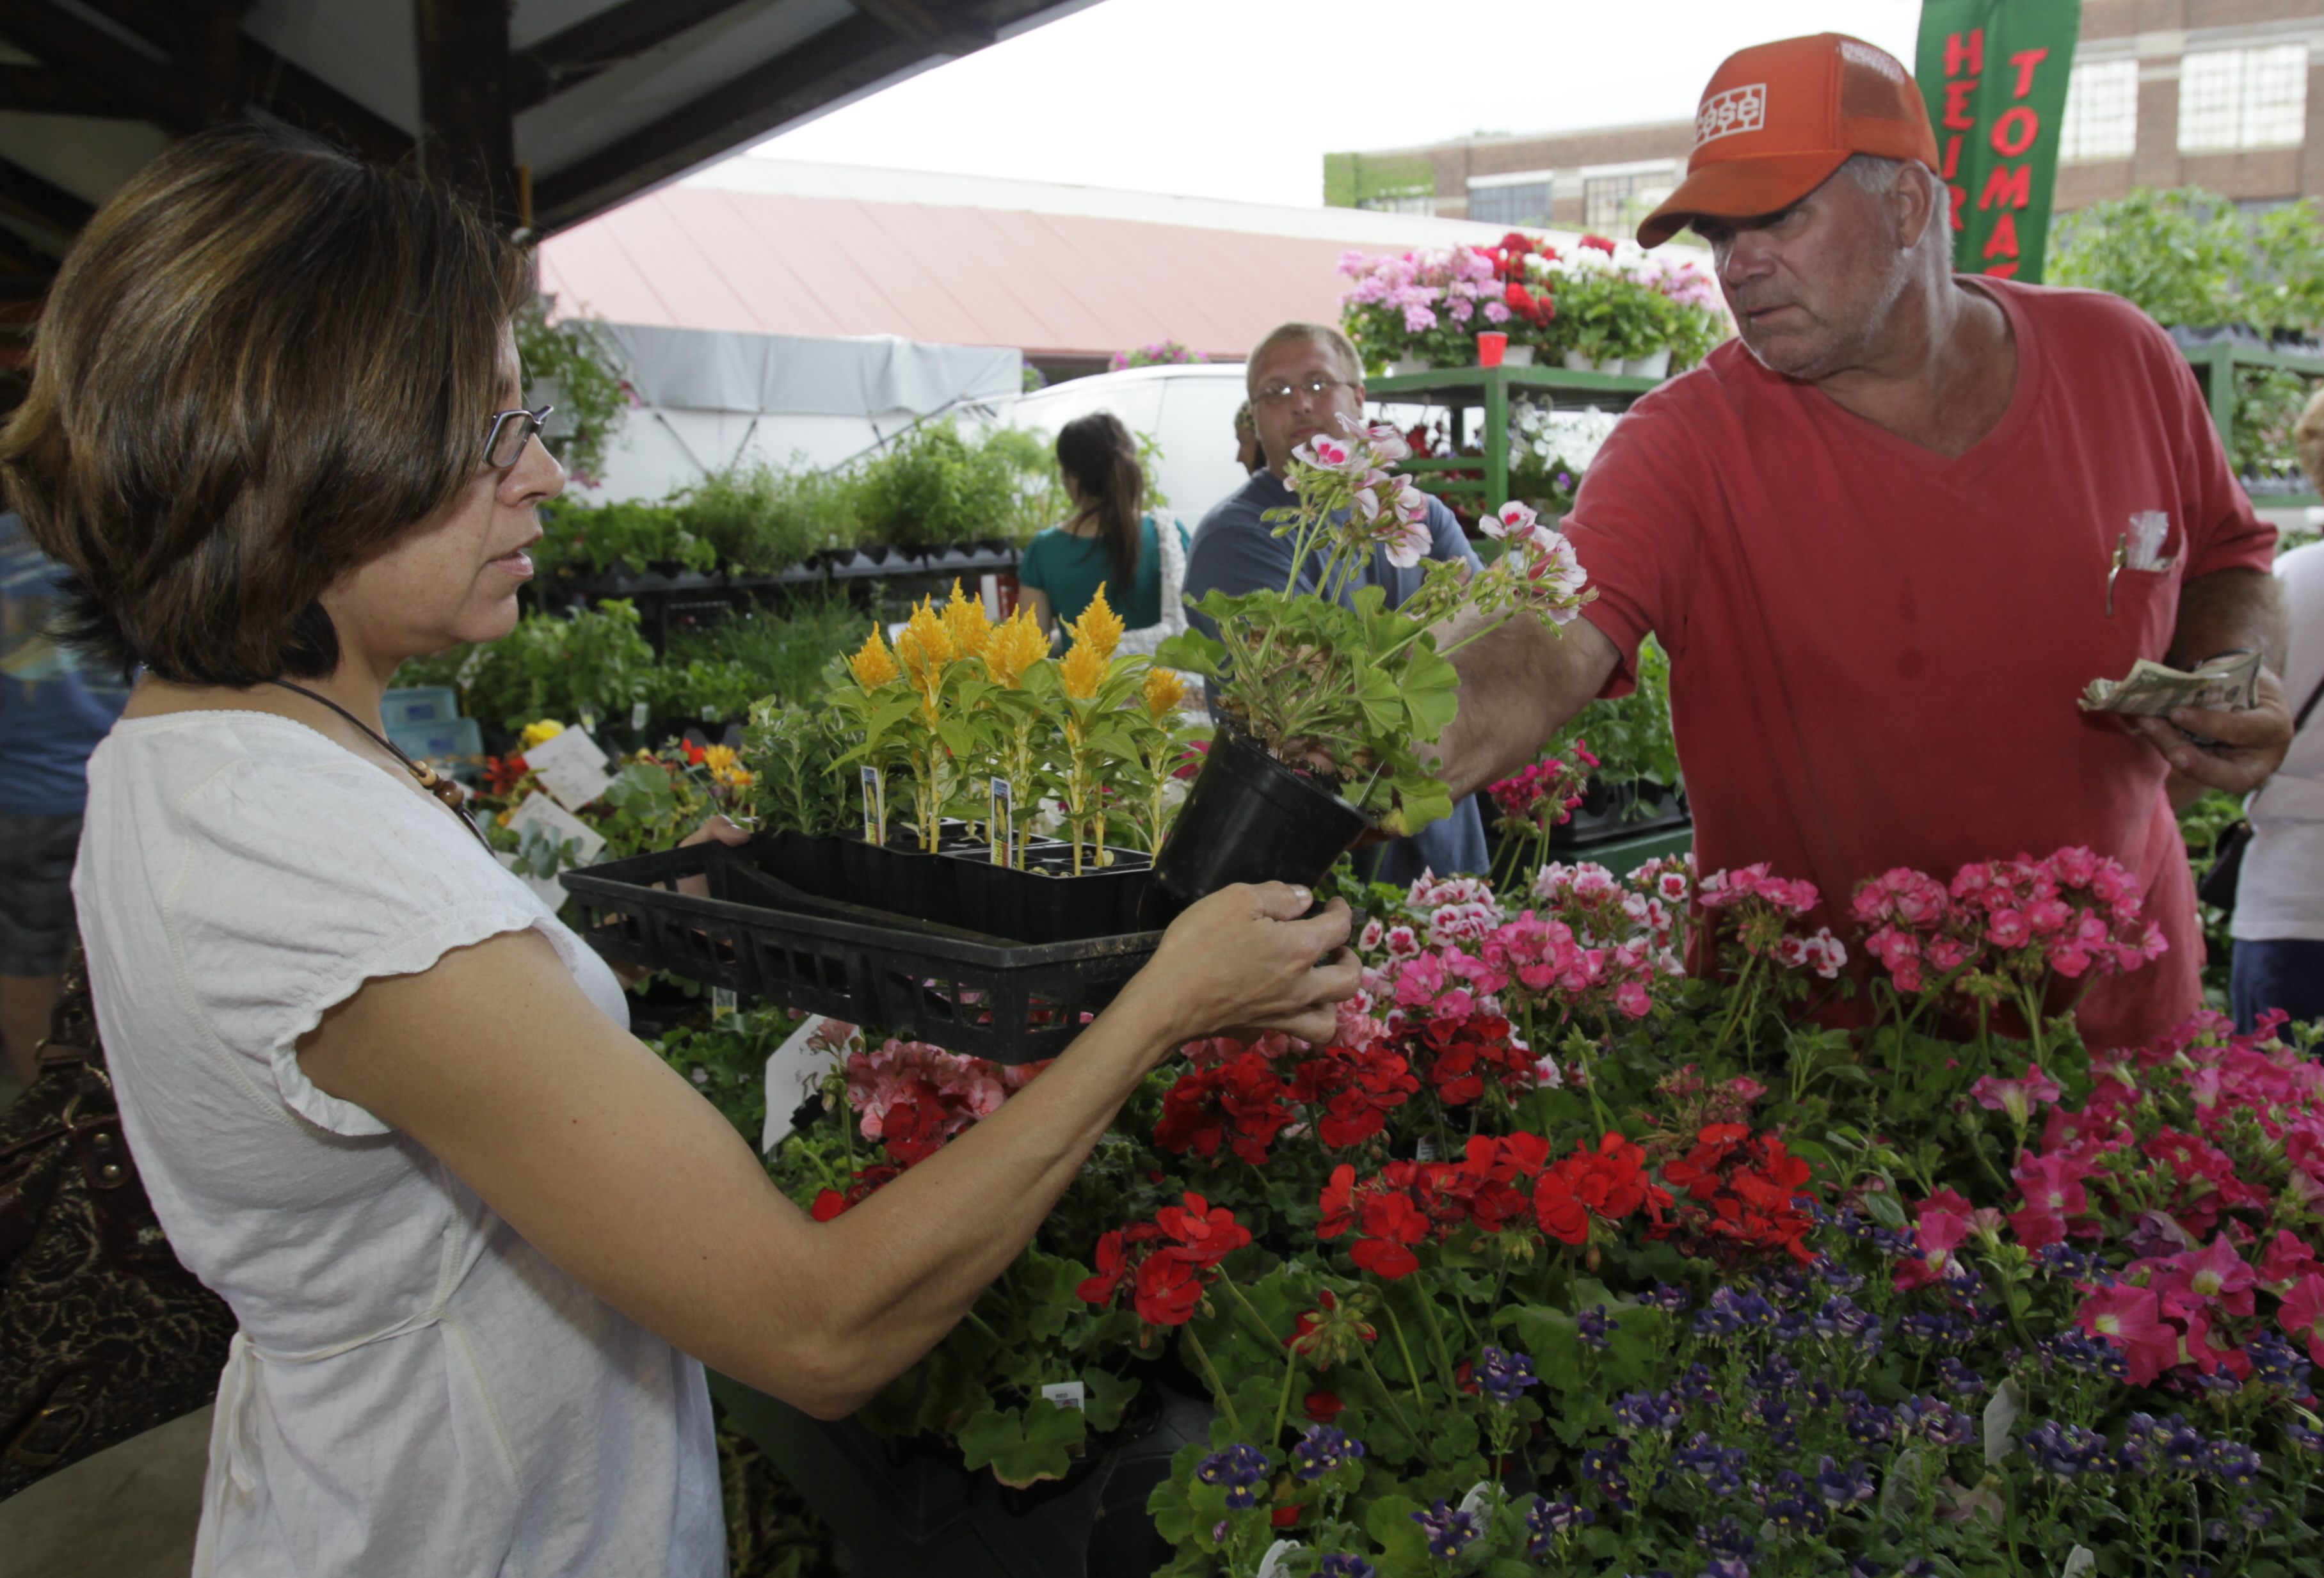 Toledo Farmers’ Market will be in full bloom this weekend The Blade